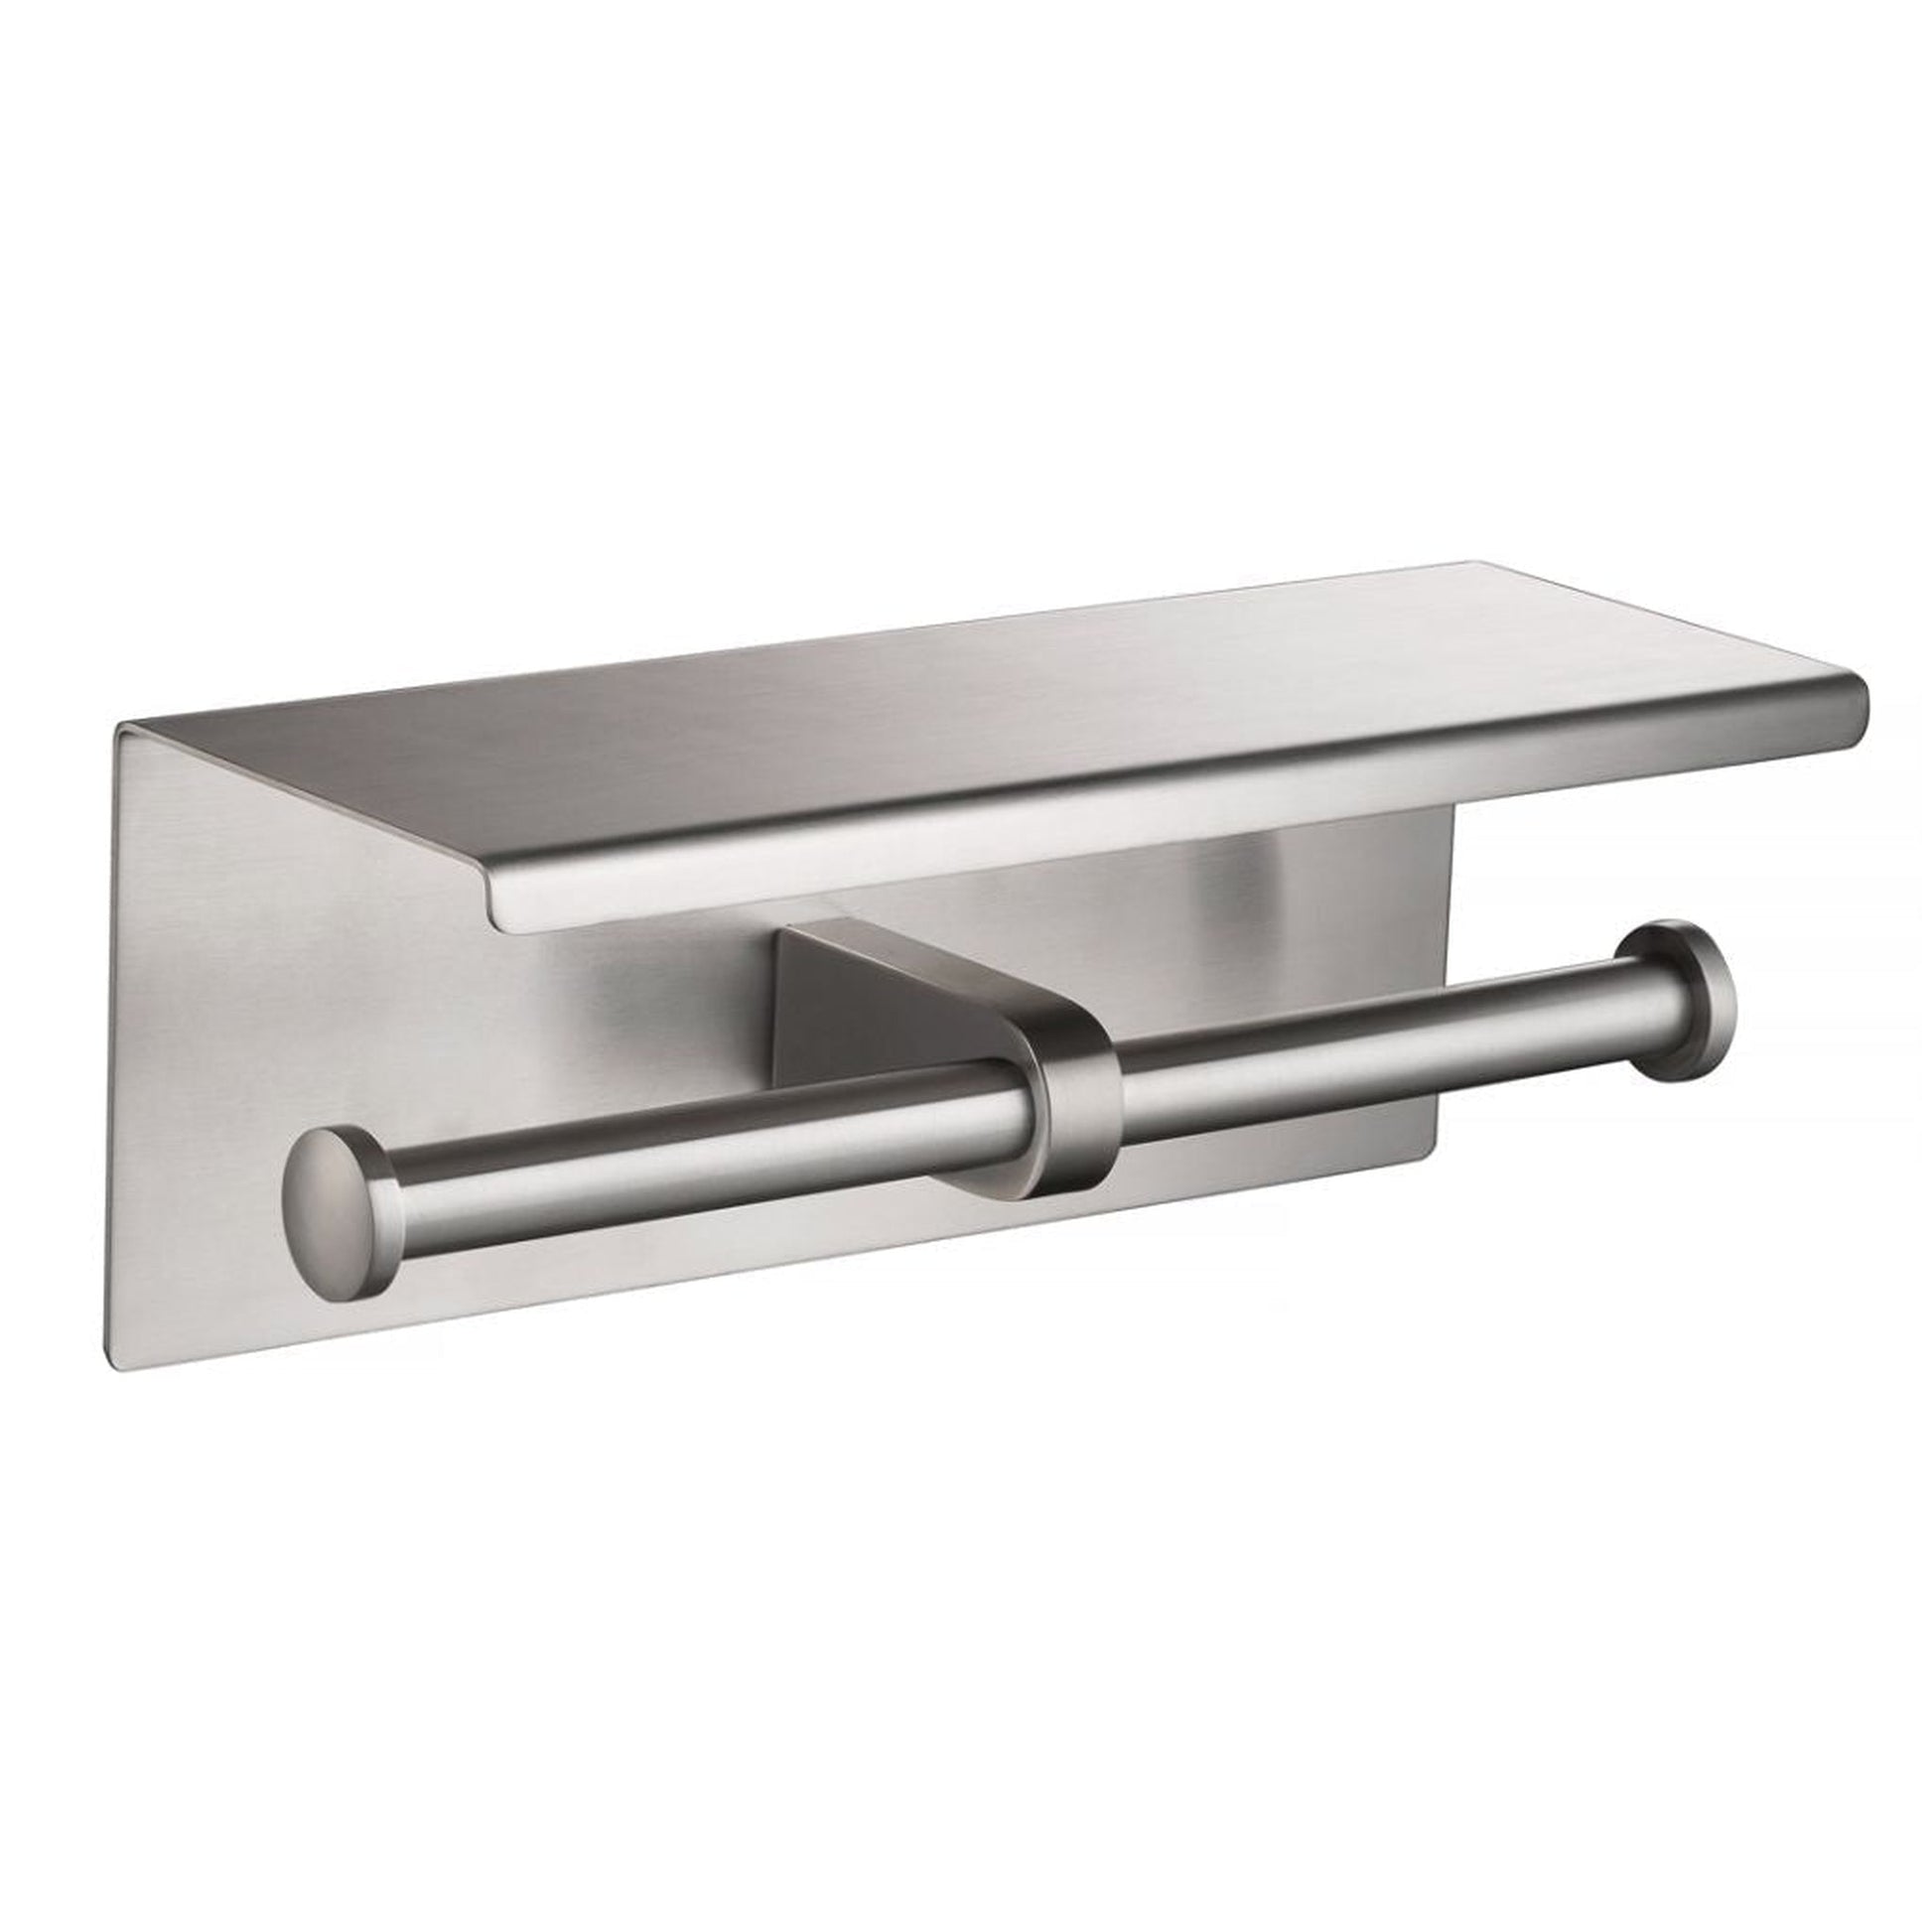 Blossom 500 Series 10" x 4" Brushed Nickel Brass Double Tissue Holder